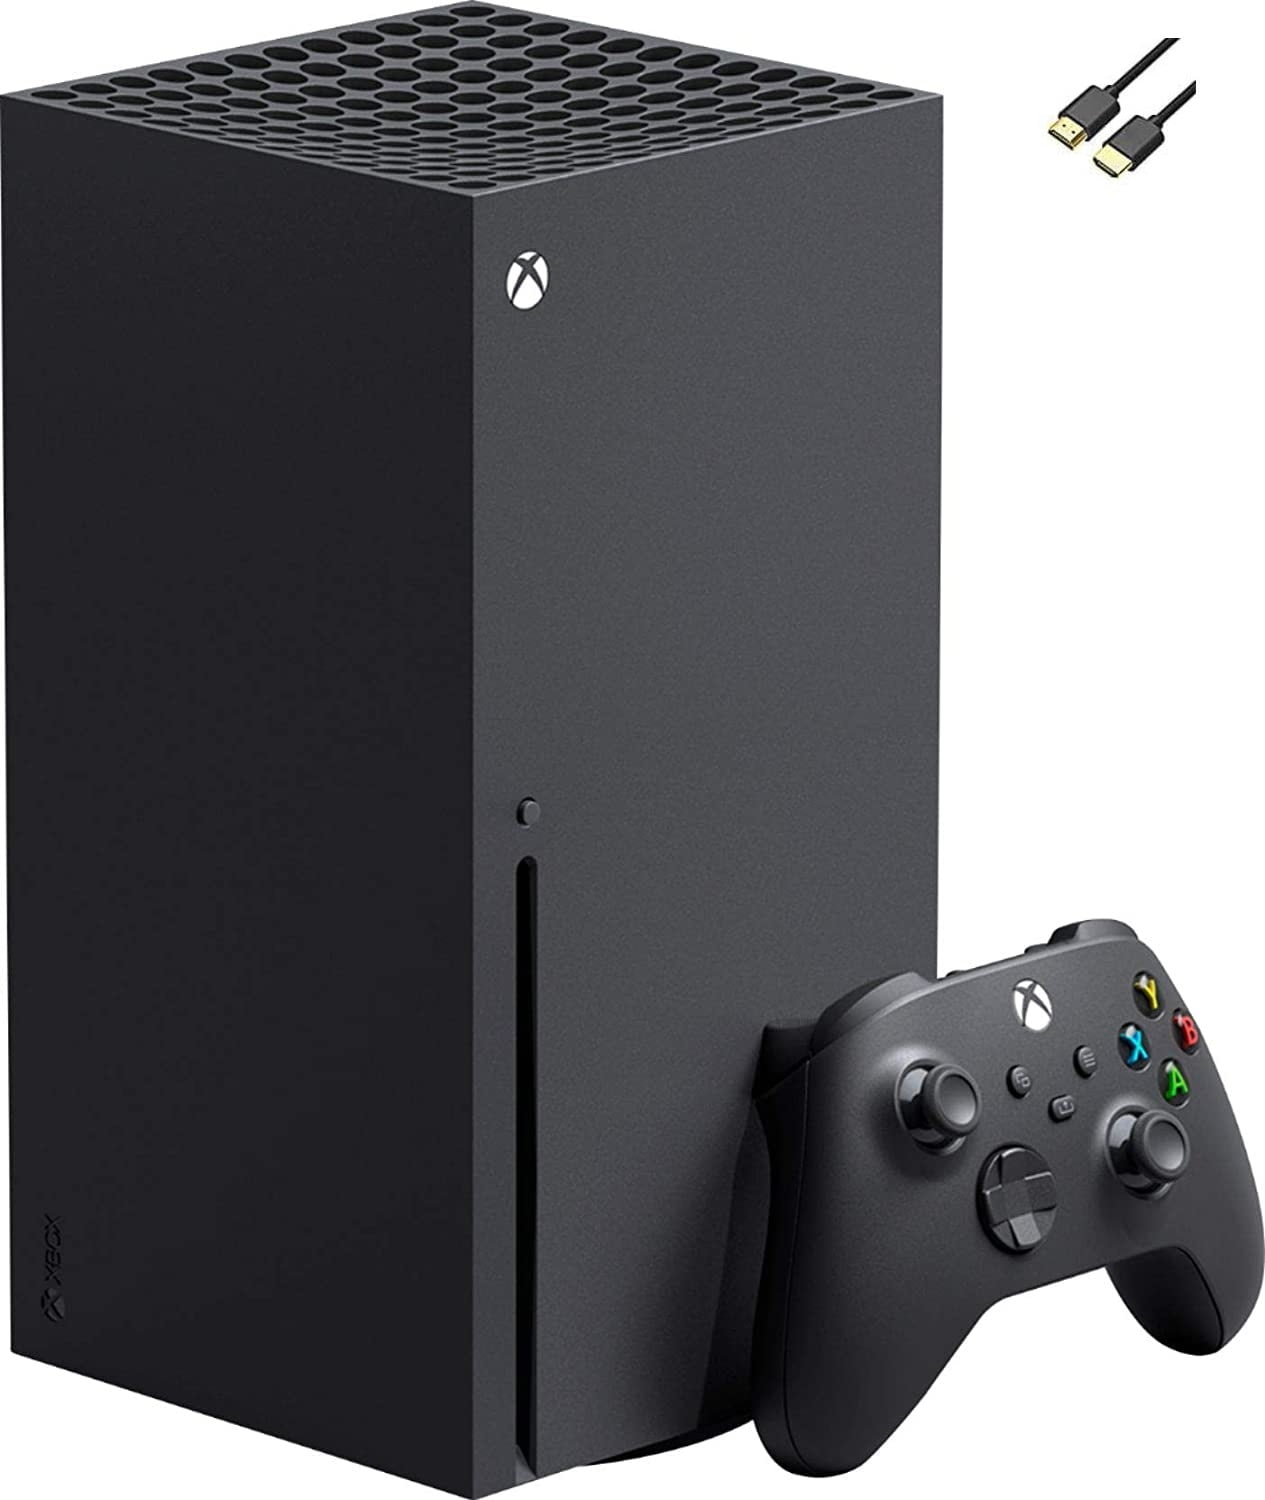 Introducing New Designed for Xbox Monitors Unlocking the True Power of HDMI  2.1 on Xbox Series X